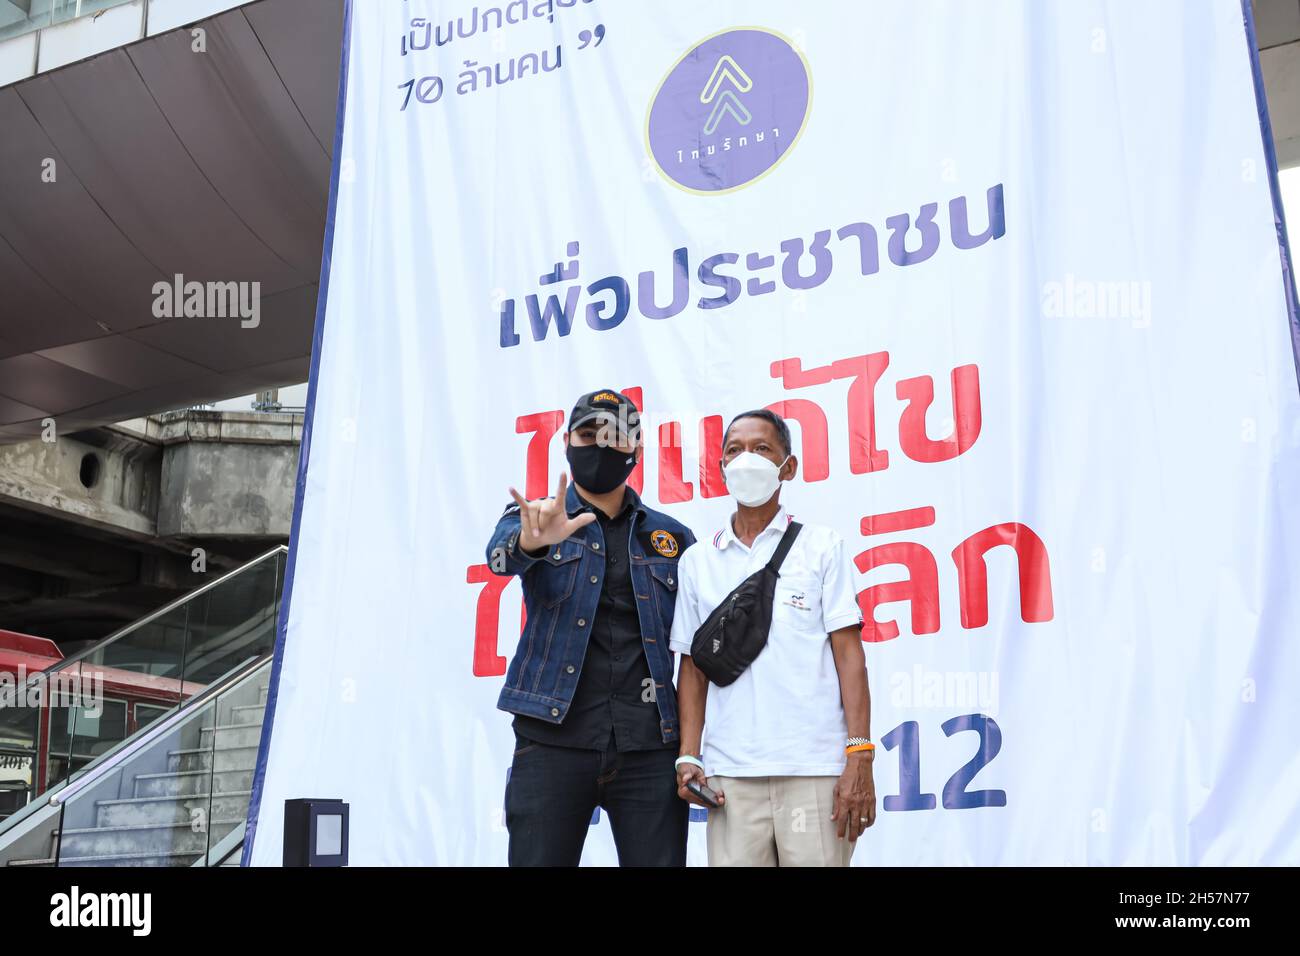 Bangkok, Thailand. 07th Nov, 2021. A royalist group called Thai Raksa gathered around the Bangkok Art and Culture Center. To express themselves symbolically and receive a signature against the amendment-repeal of the lèse-majesté law. Known as the Criminal Law, Section 112. (Photo by Adirach Toumlamoon/Pacific Press) Credit: Pacific Press Media Production Corp./Alamy Live News Stock Photo